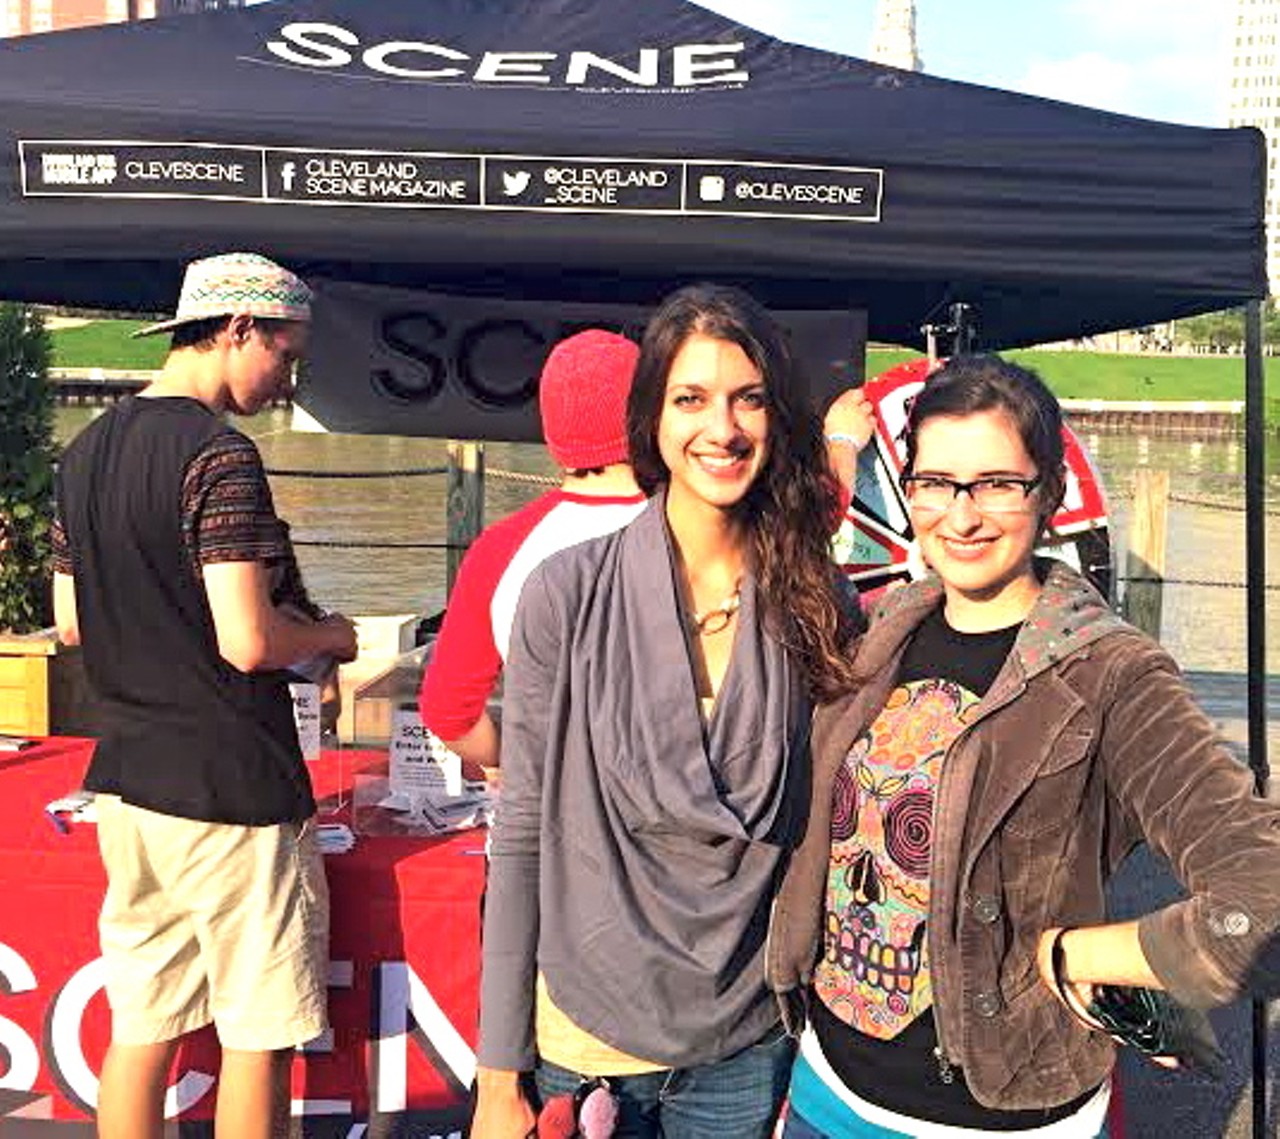 11 Photos of the Scene Events Team Driven by Fiat of Strongsville at Panic! At the Disco